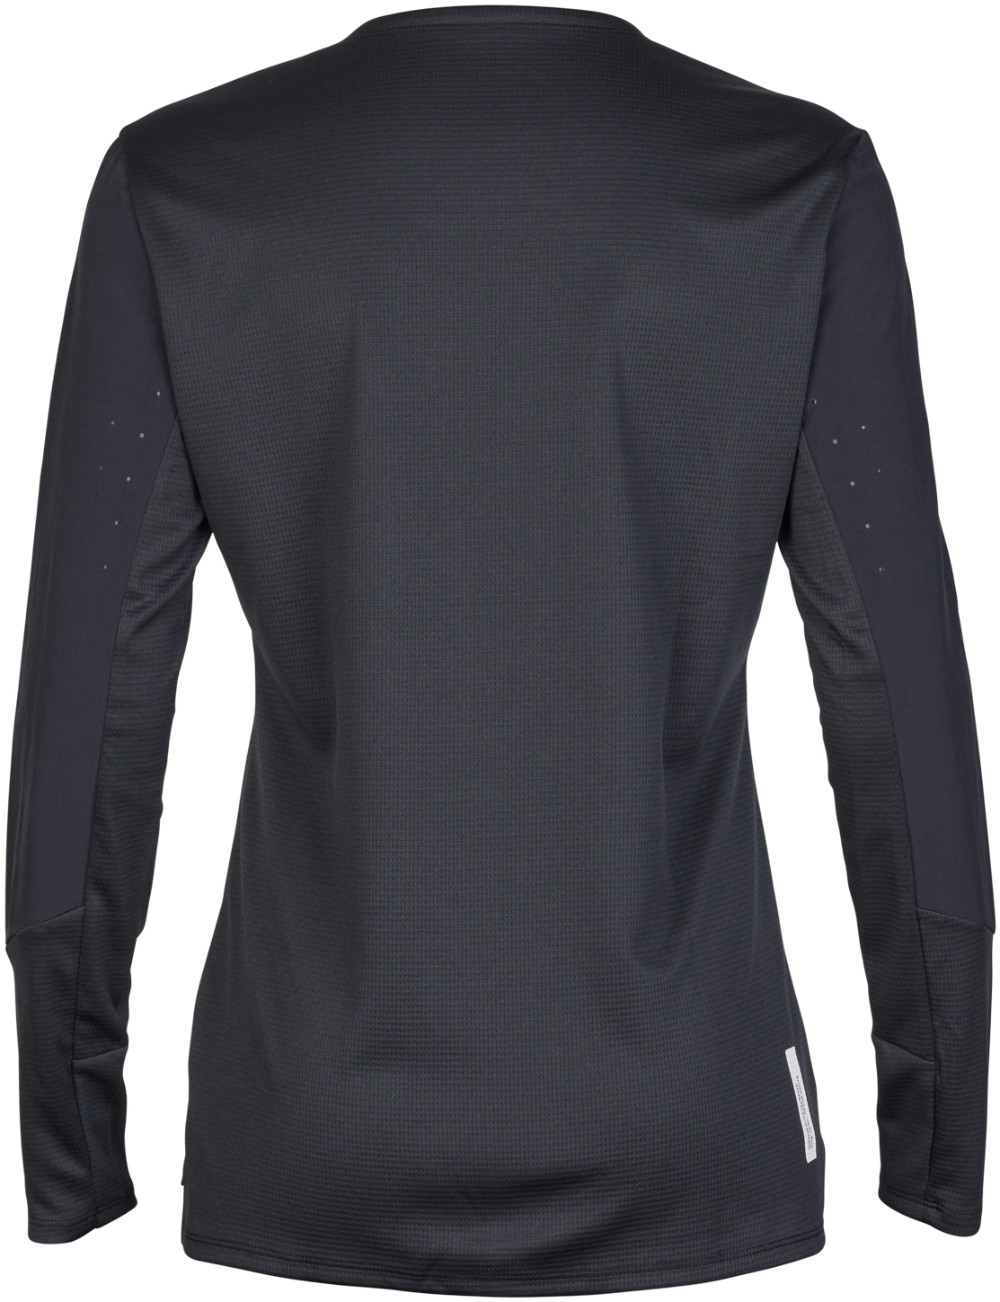 Defend Womens Long Sleeve MTB Jersey image 1